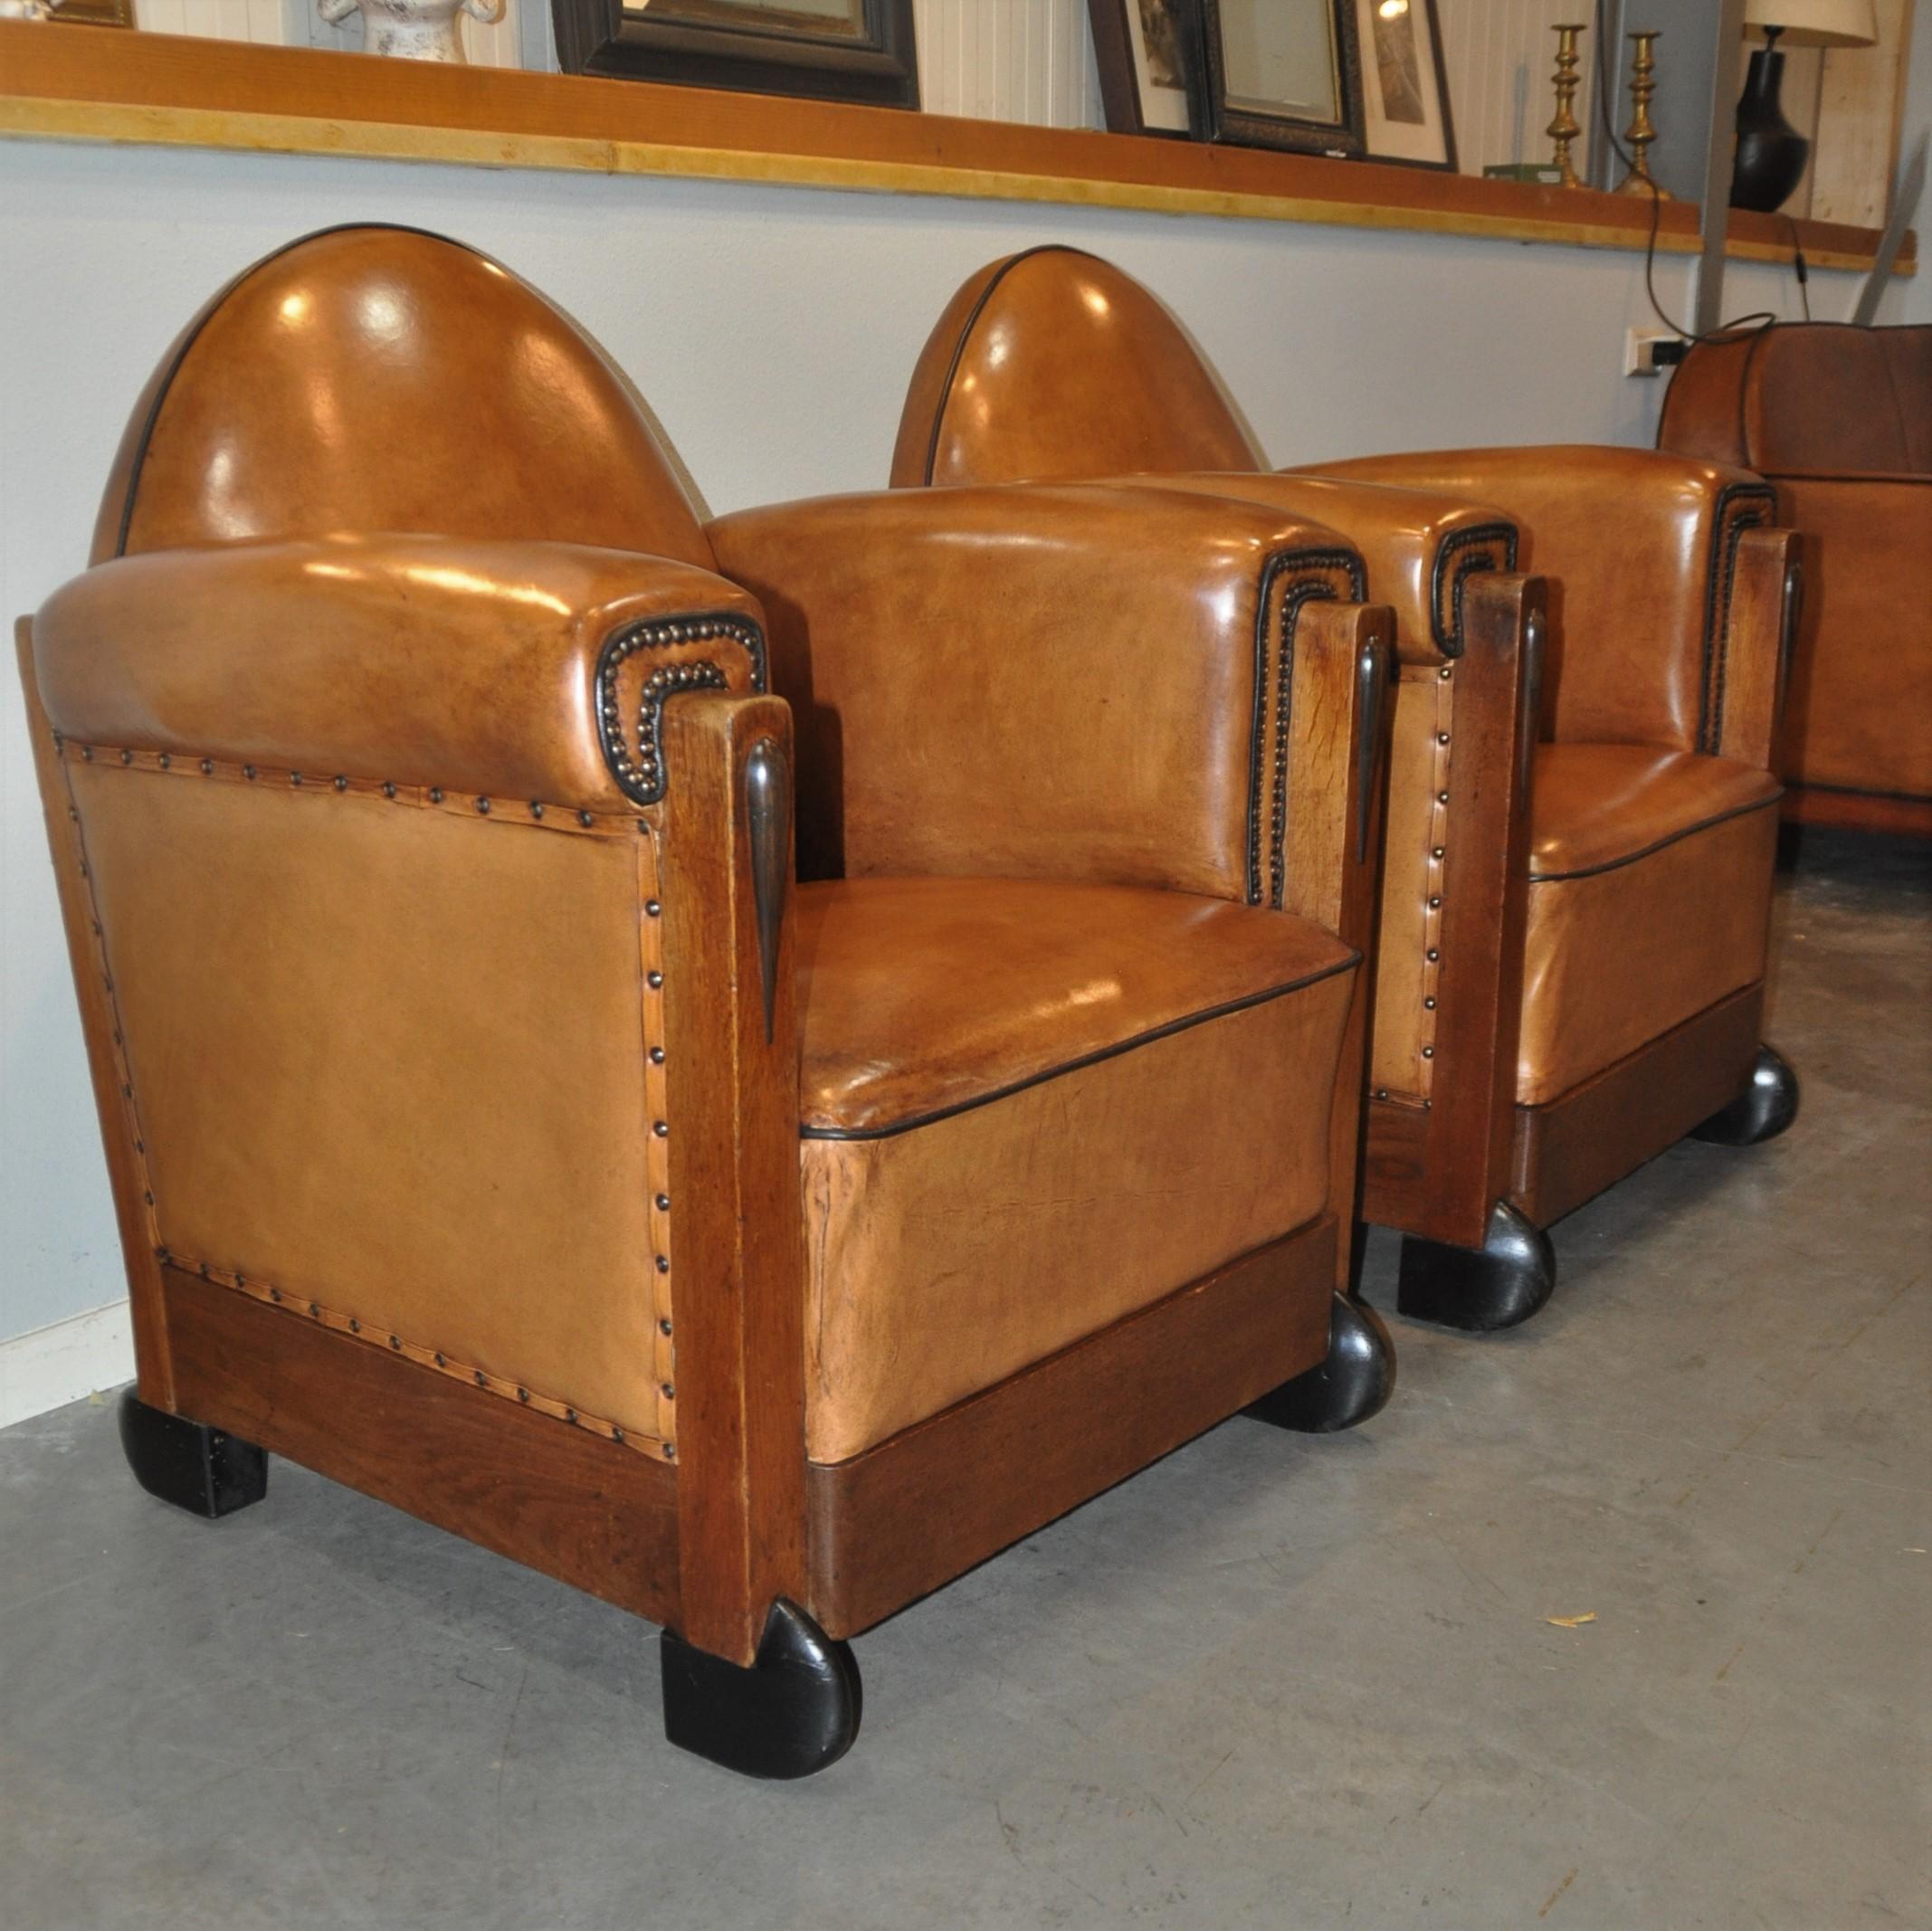 Dutch Art Deco Sheep Leather Arm Chairs, Set of 2, the Netherlands, 1920s